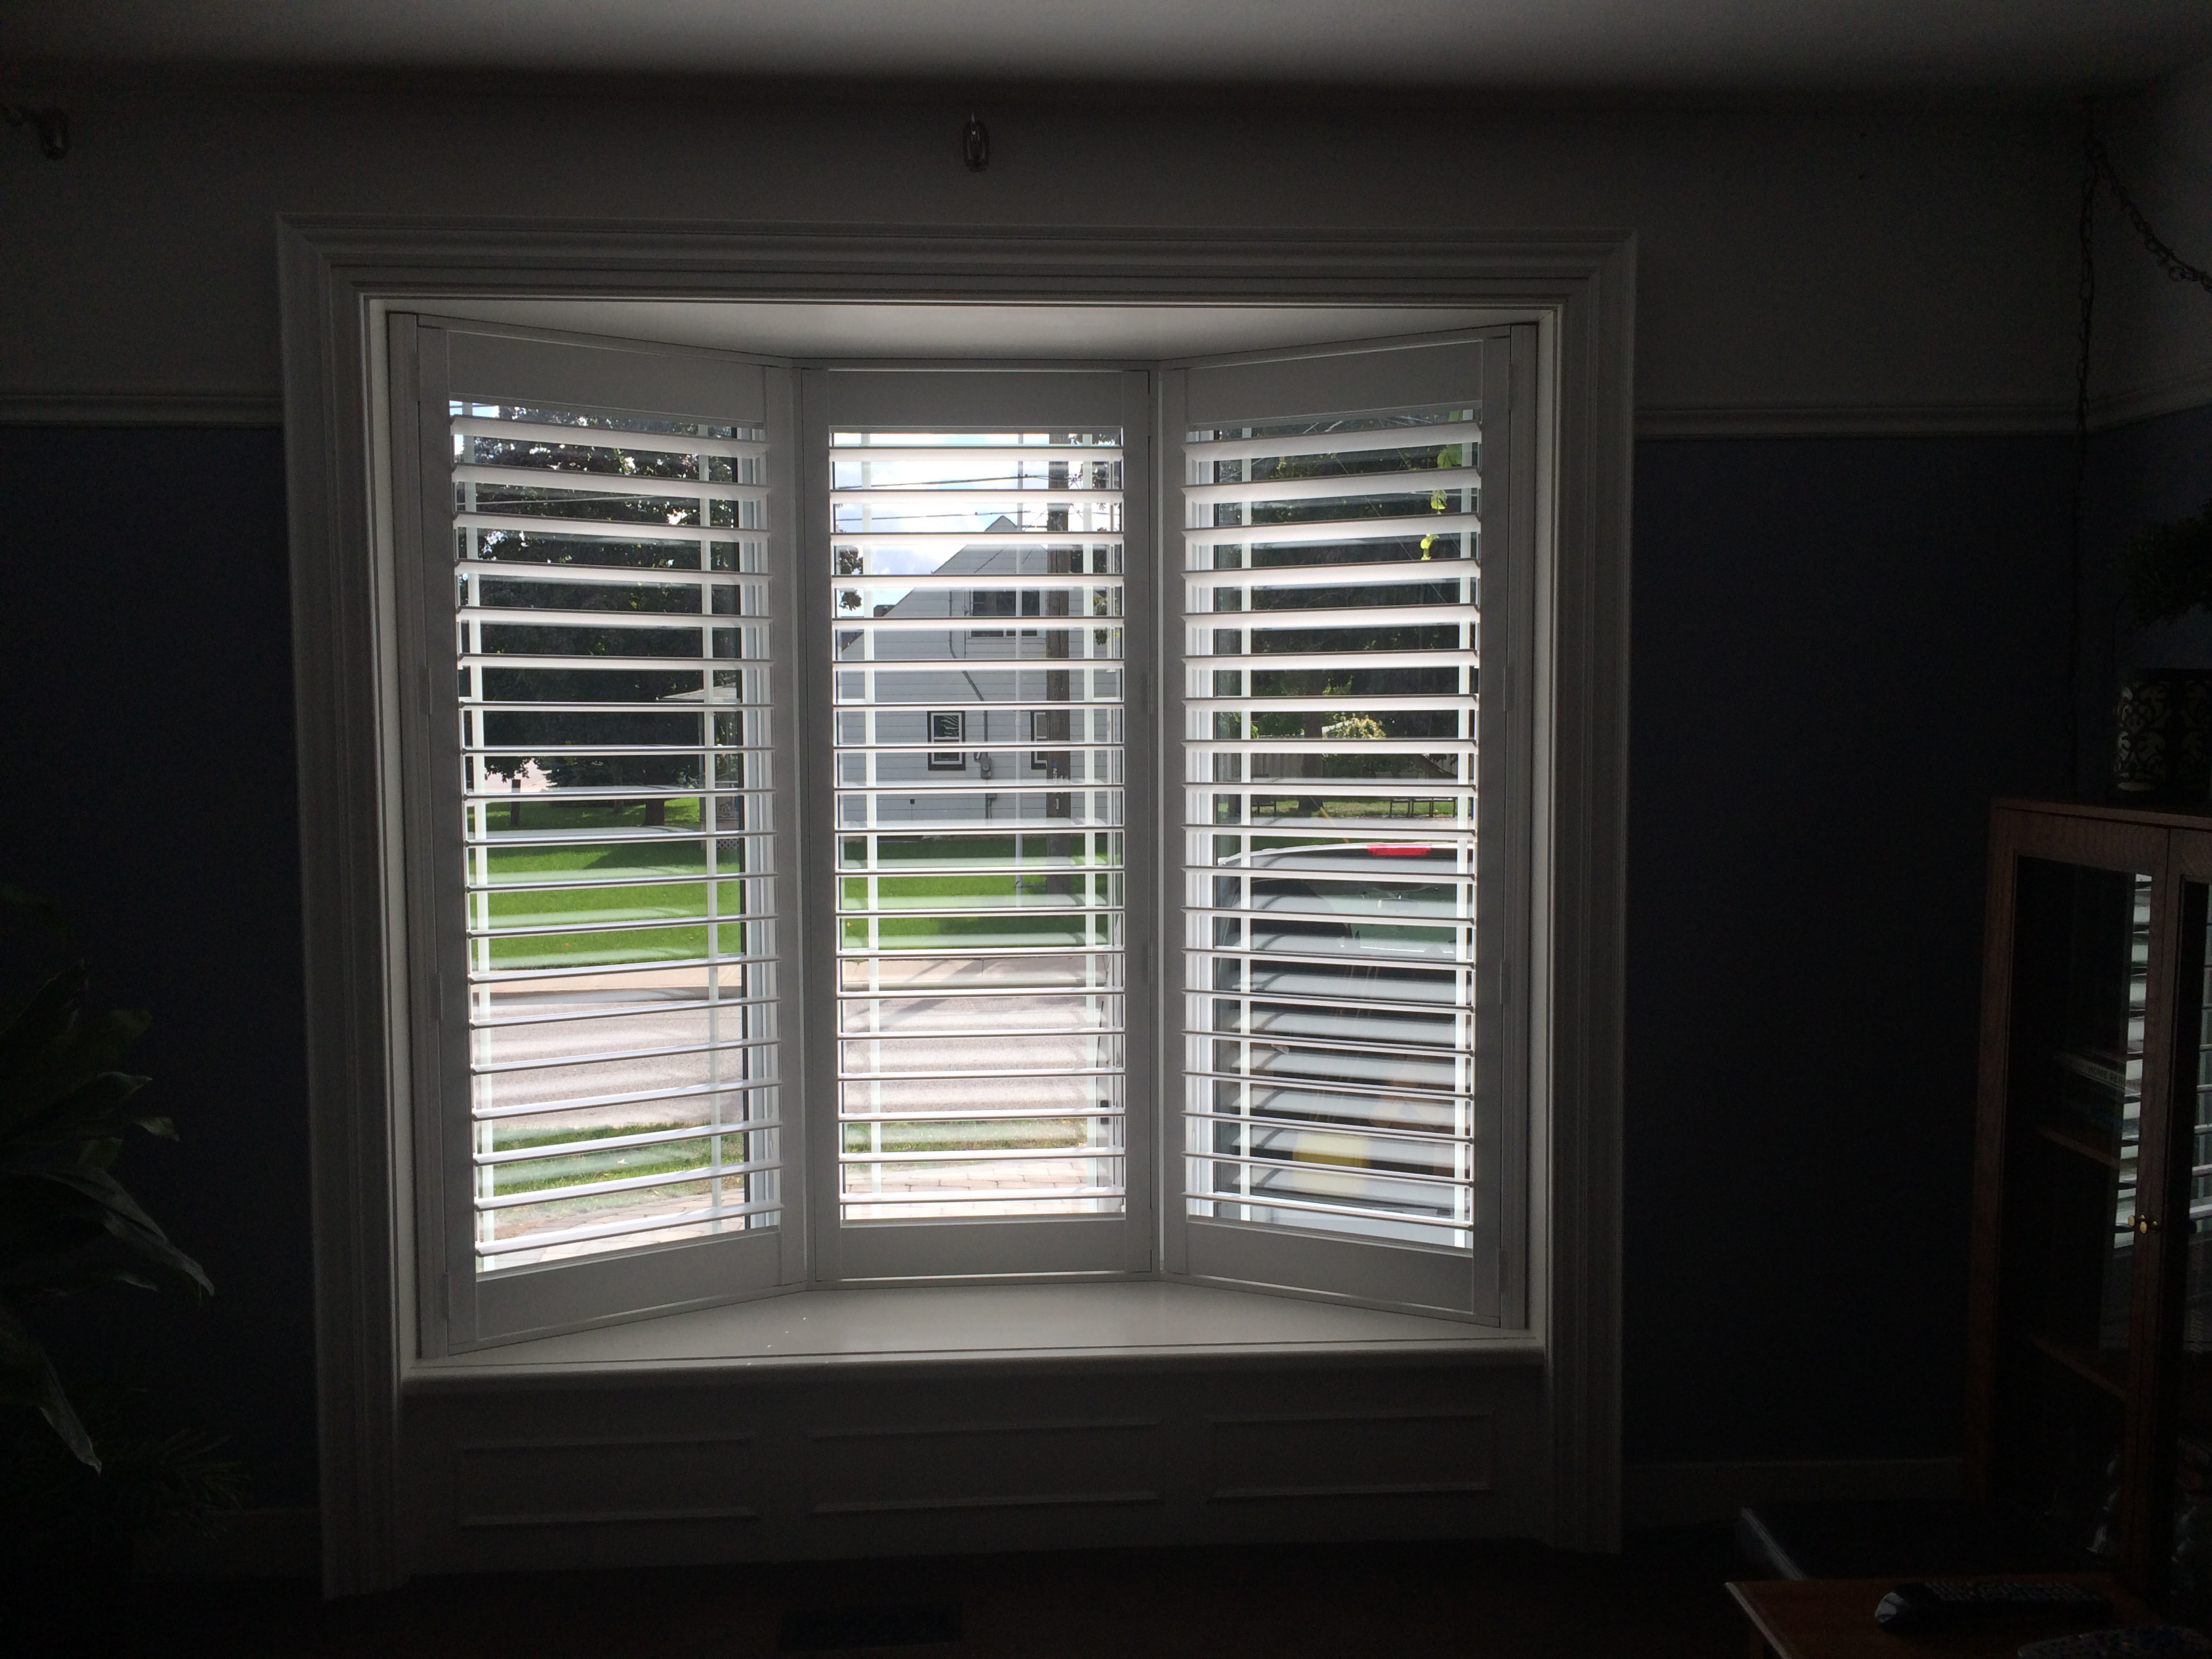 Vinyl Shutters on a Bay Window Budget Blinds of Port Perry Blackstock (905)213-2583